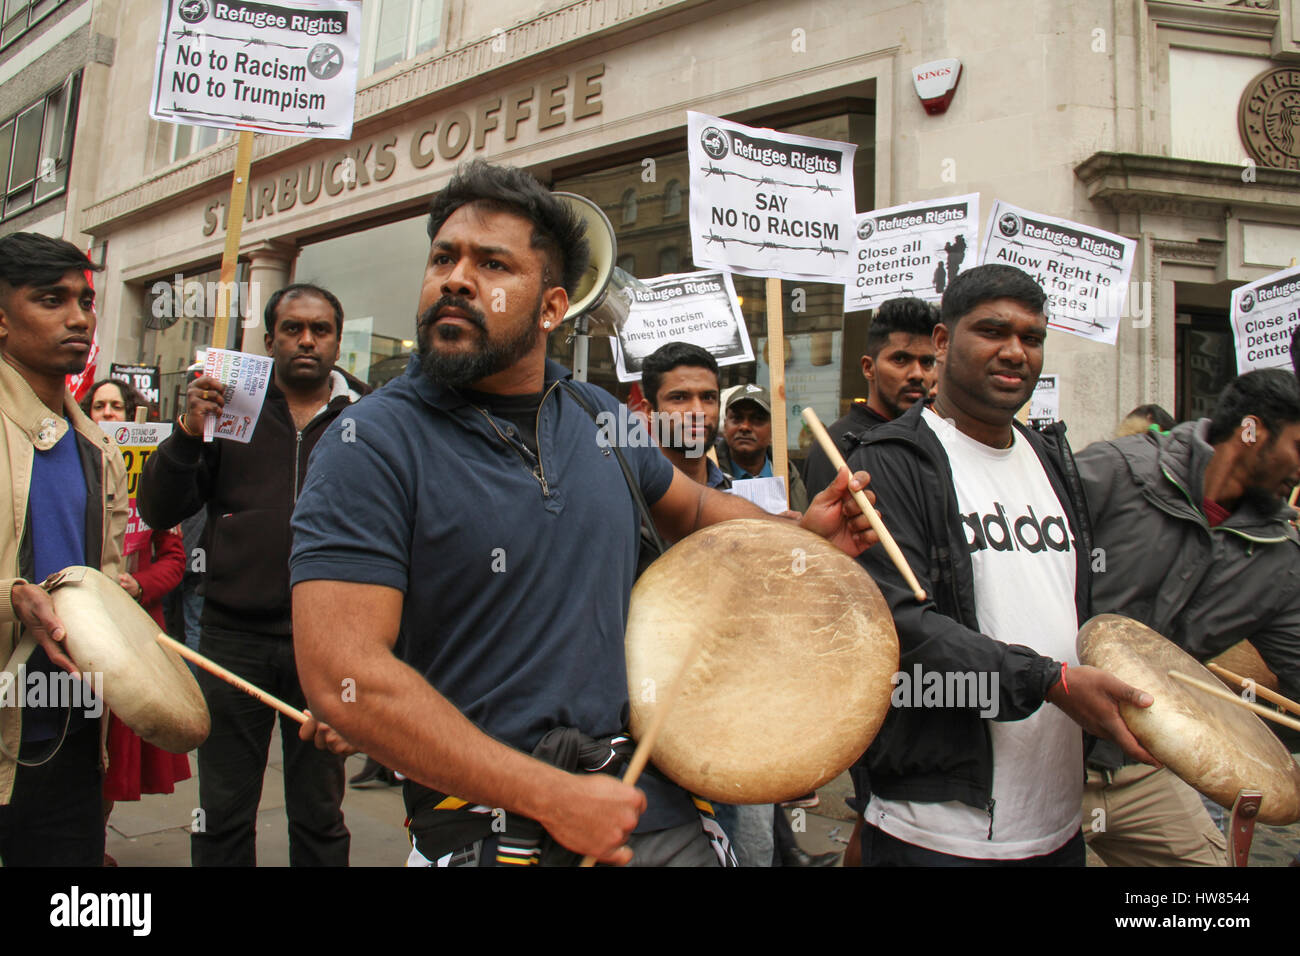 London, UK. March 18, 2017: Indian immigrants drum and chant as they prepare to participate in the Stand Up To Racism demonstration on UN Anti-Racism Day in the streets of London on March 18, 2017. The march began at Portland Place (BBC) and ended at Parliament Square, where a rally is scheduled. The UN Anti-Racism Day is a global day of action against racism in all its forms. © David Mbiyu/Alamy Live News Stock Photo